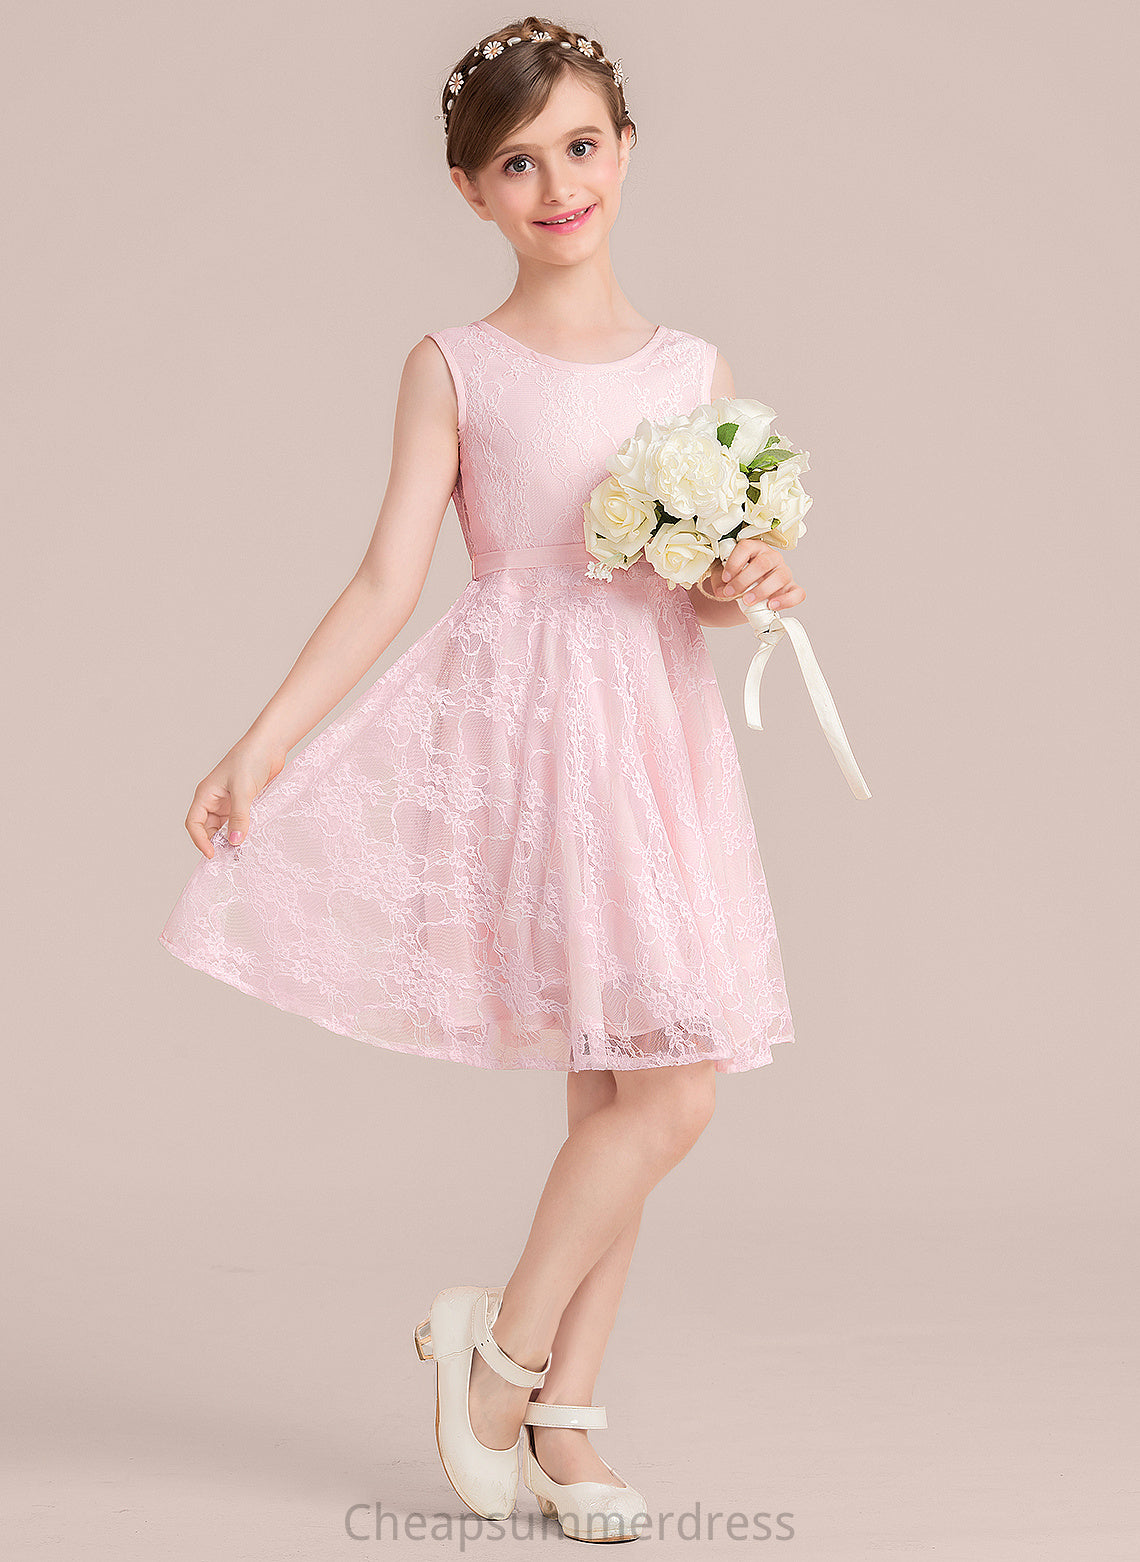 A-Line Bow(s) Sash Dulce Scoop With Neck Lace Knee-Length Junior Bridesmaid Dresses